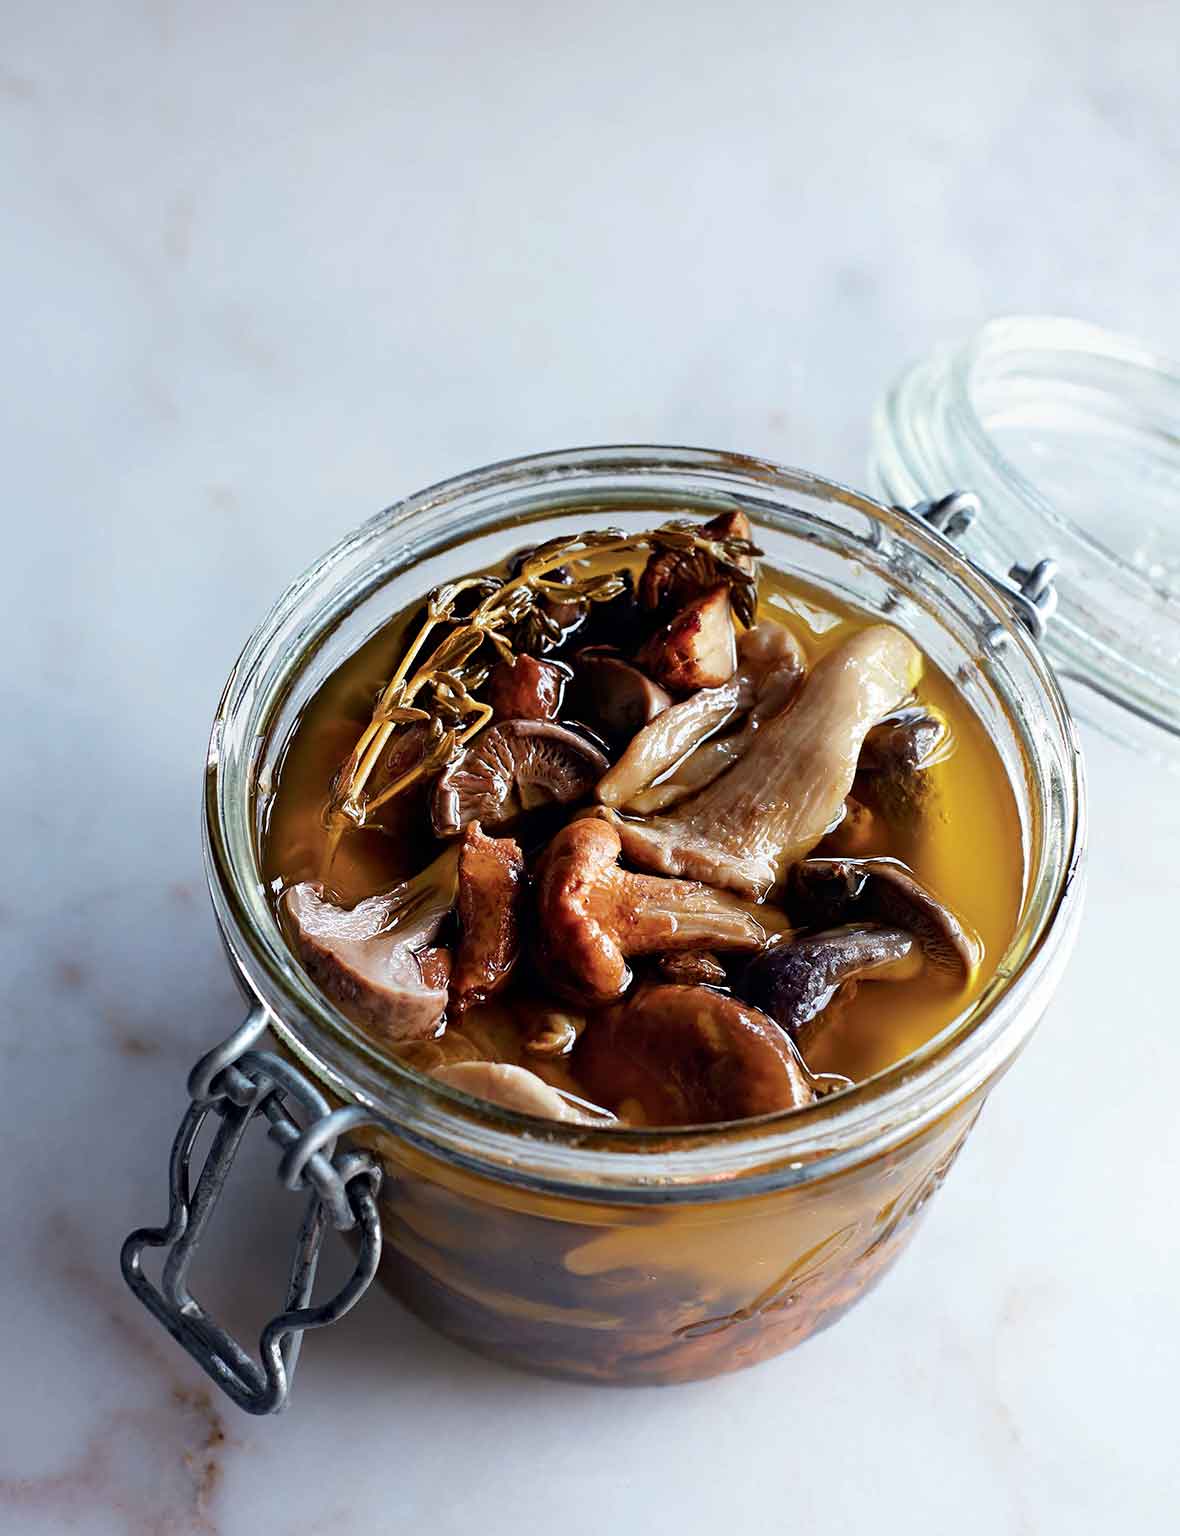 A canning jar filled with pickled wild mushrooms and a sprig of thyme.